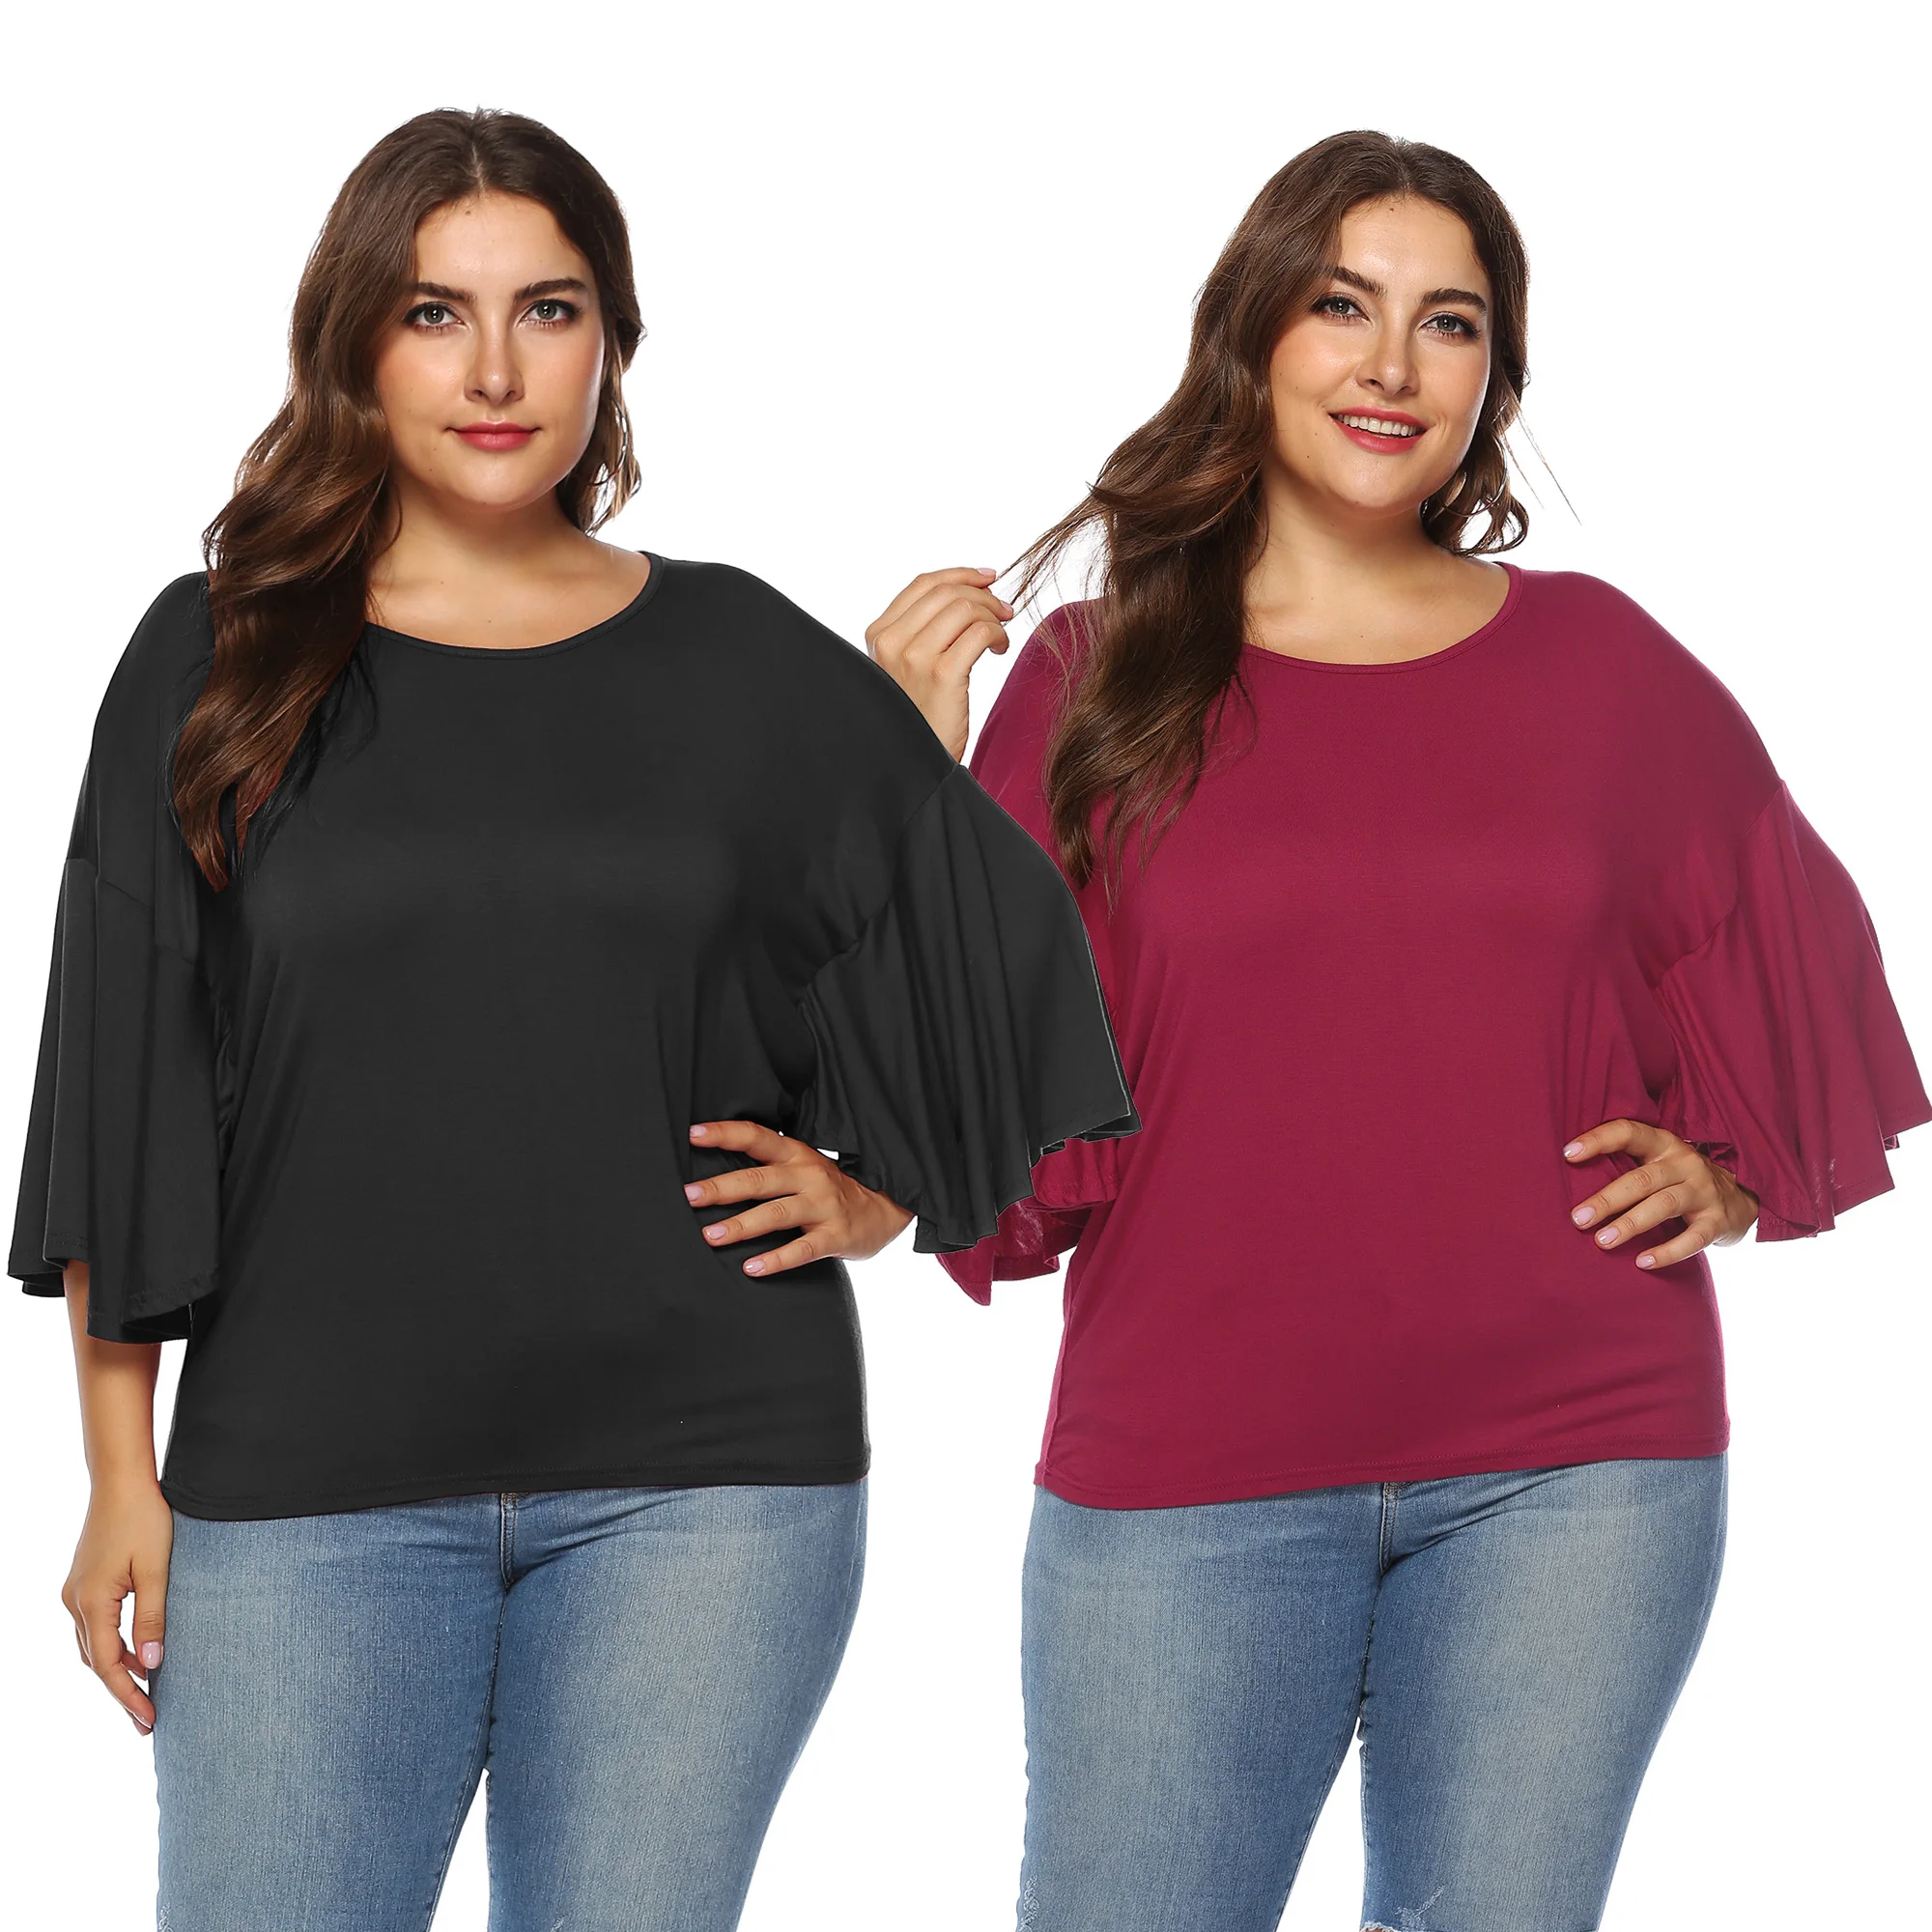 Wholesale Plus Size Women Ruffle Half Ruffle Sleeve Blouse Shirt Tops With  Factory Price - Buy Plus Size Blouse Shirt,Ruffle Sleeve Tops,Half Sleeve  Blouse Product on Alibaba.com